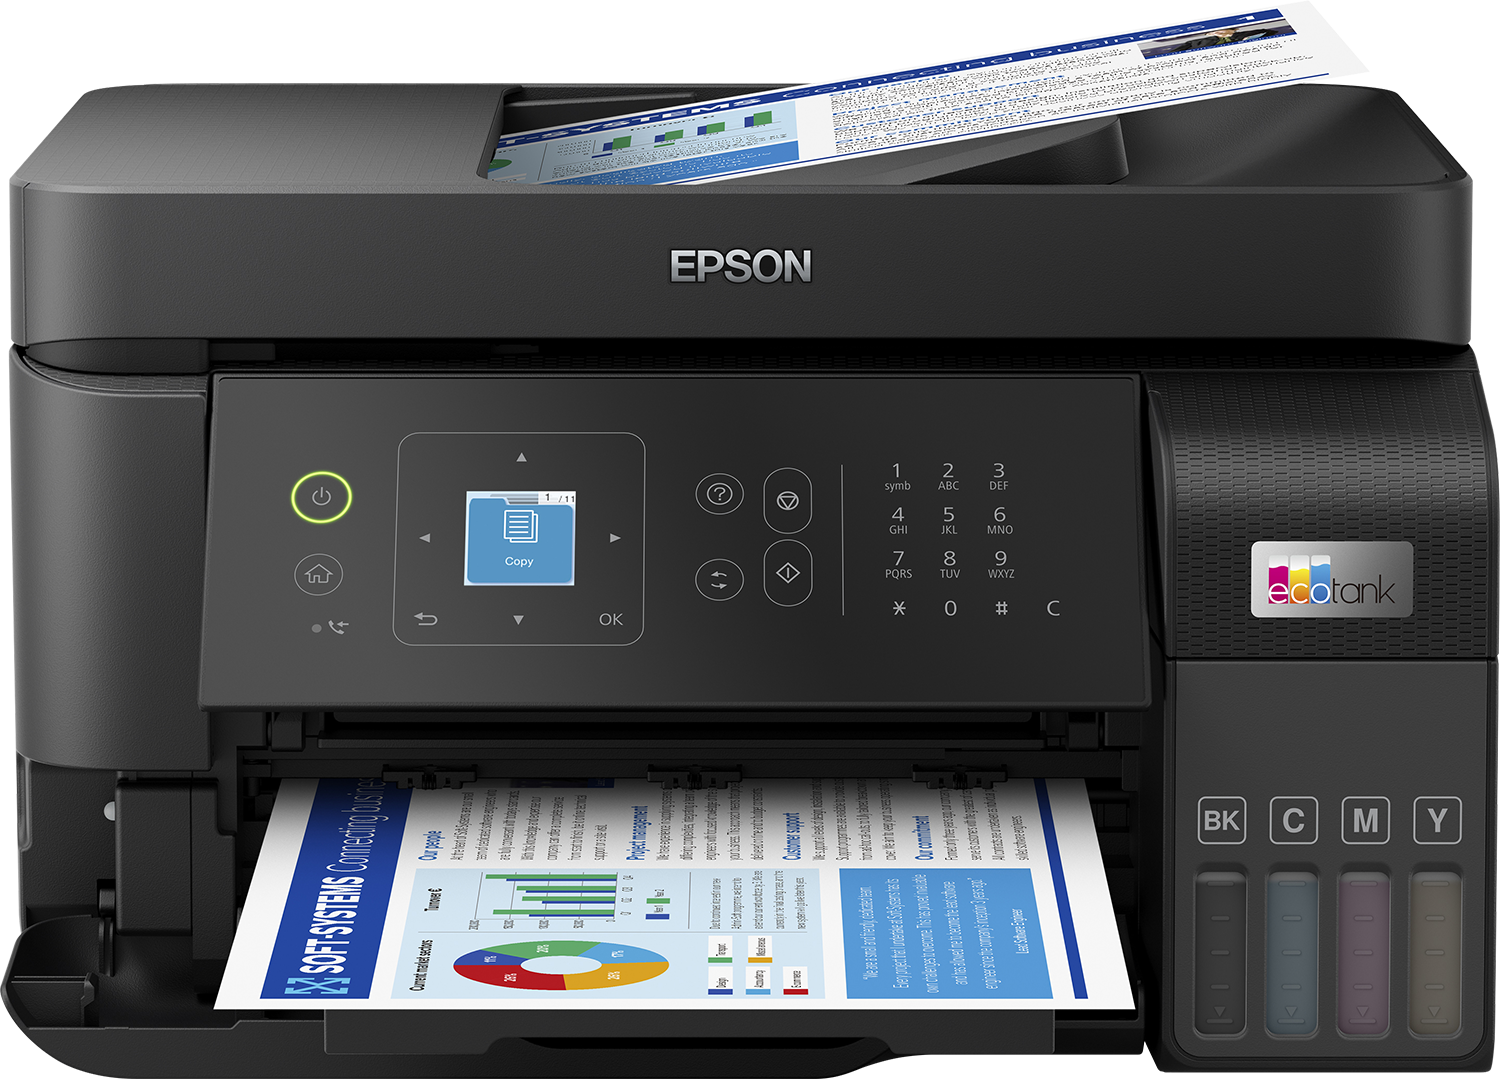 Epson Printer keeps saying out of paper, what should I do?